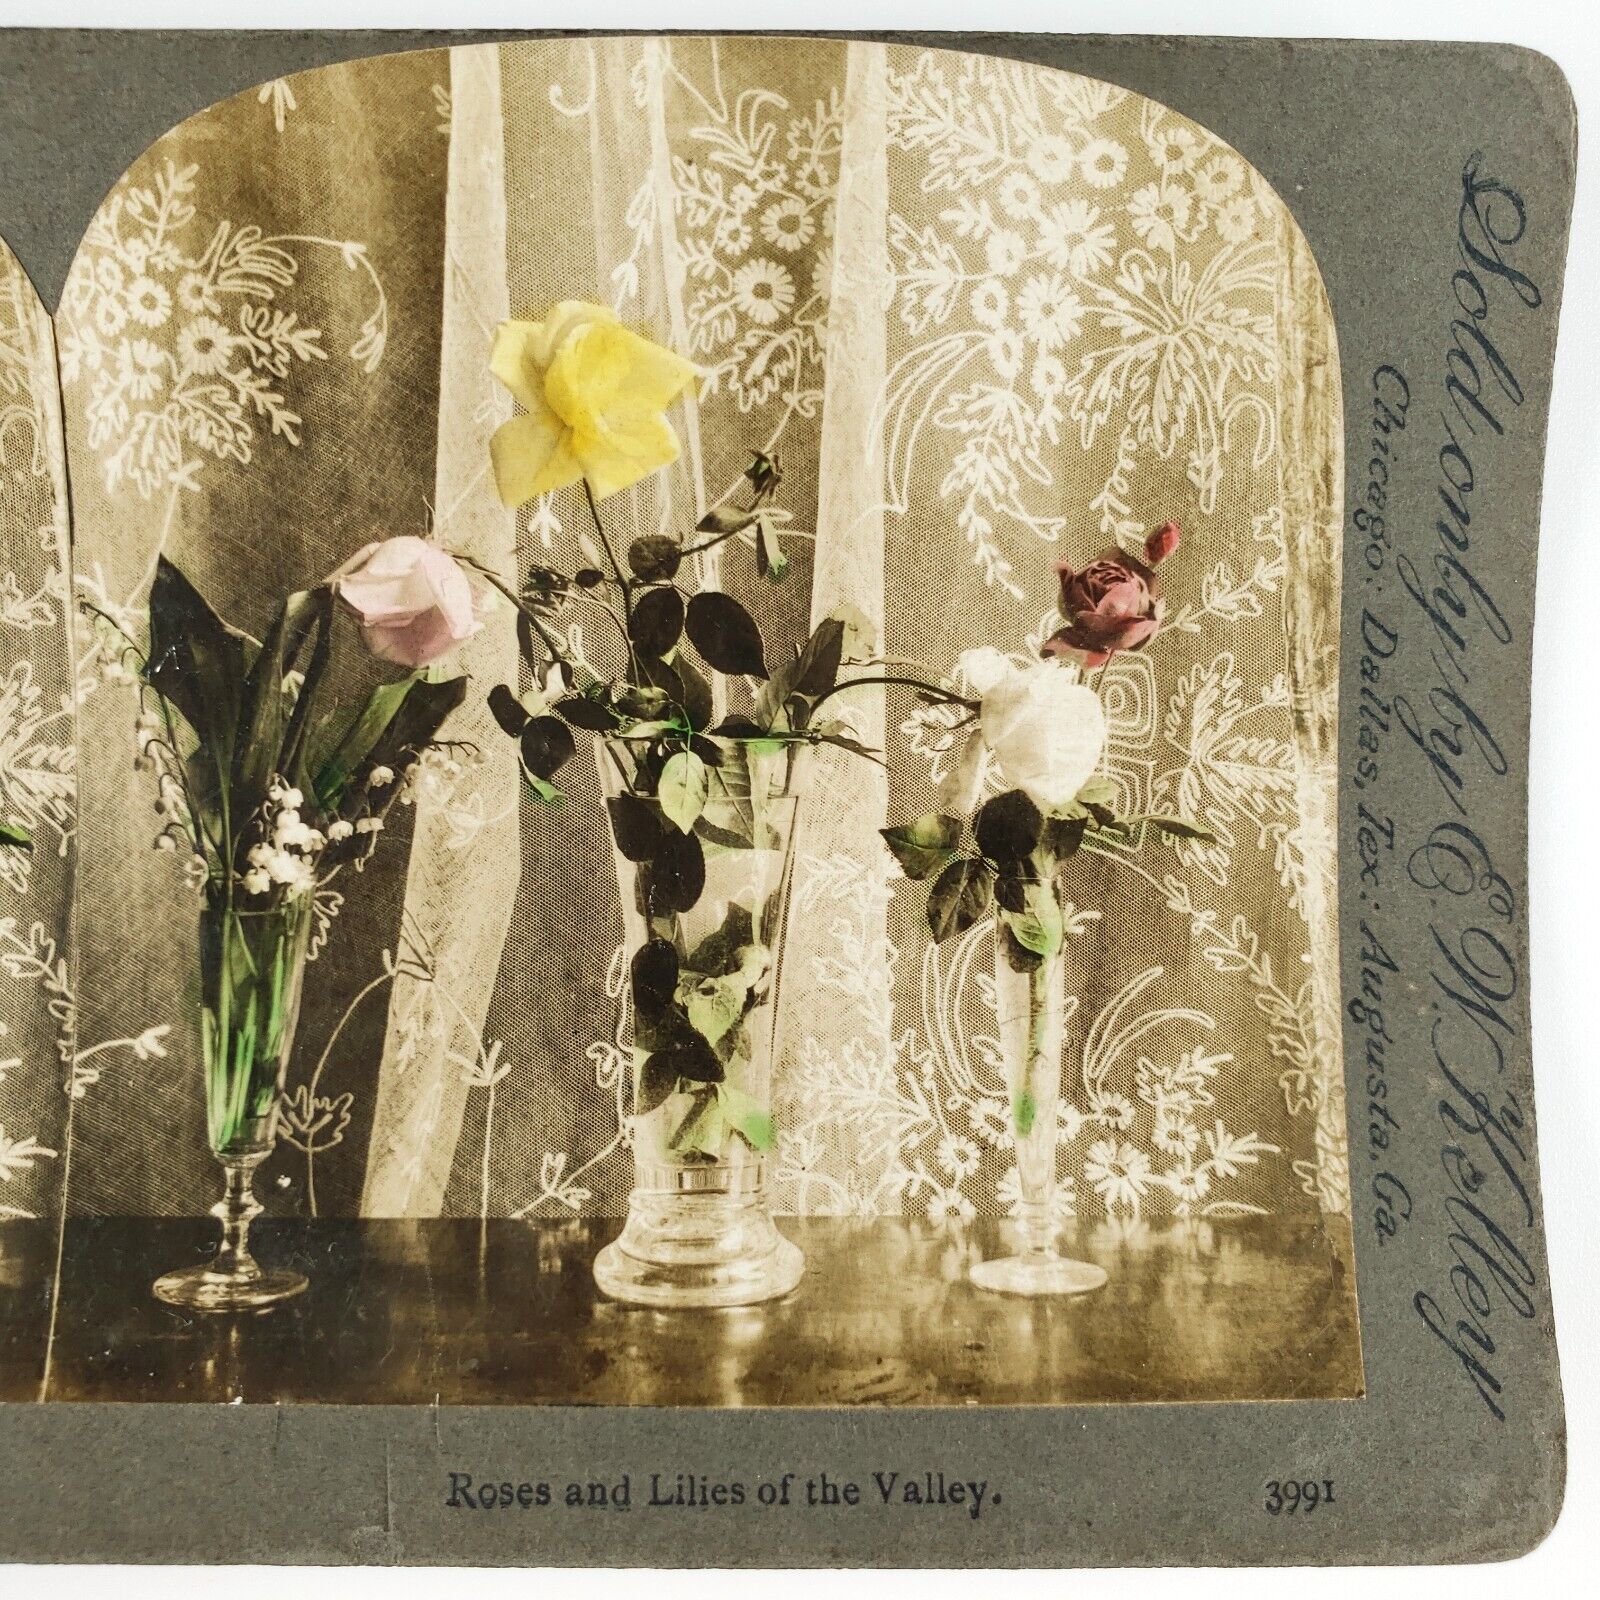 Lily of the Valley Rose Vase Stereoview c1895 Tinted Floral Lace Still Life J189